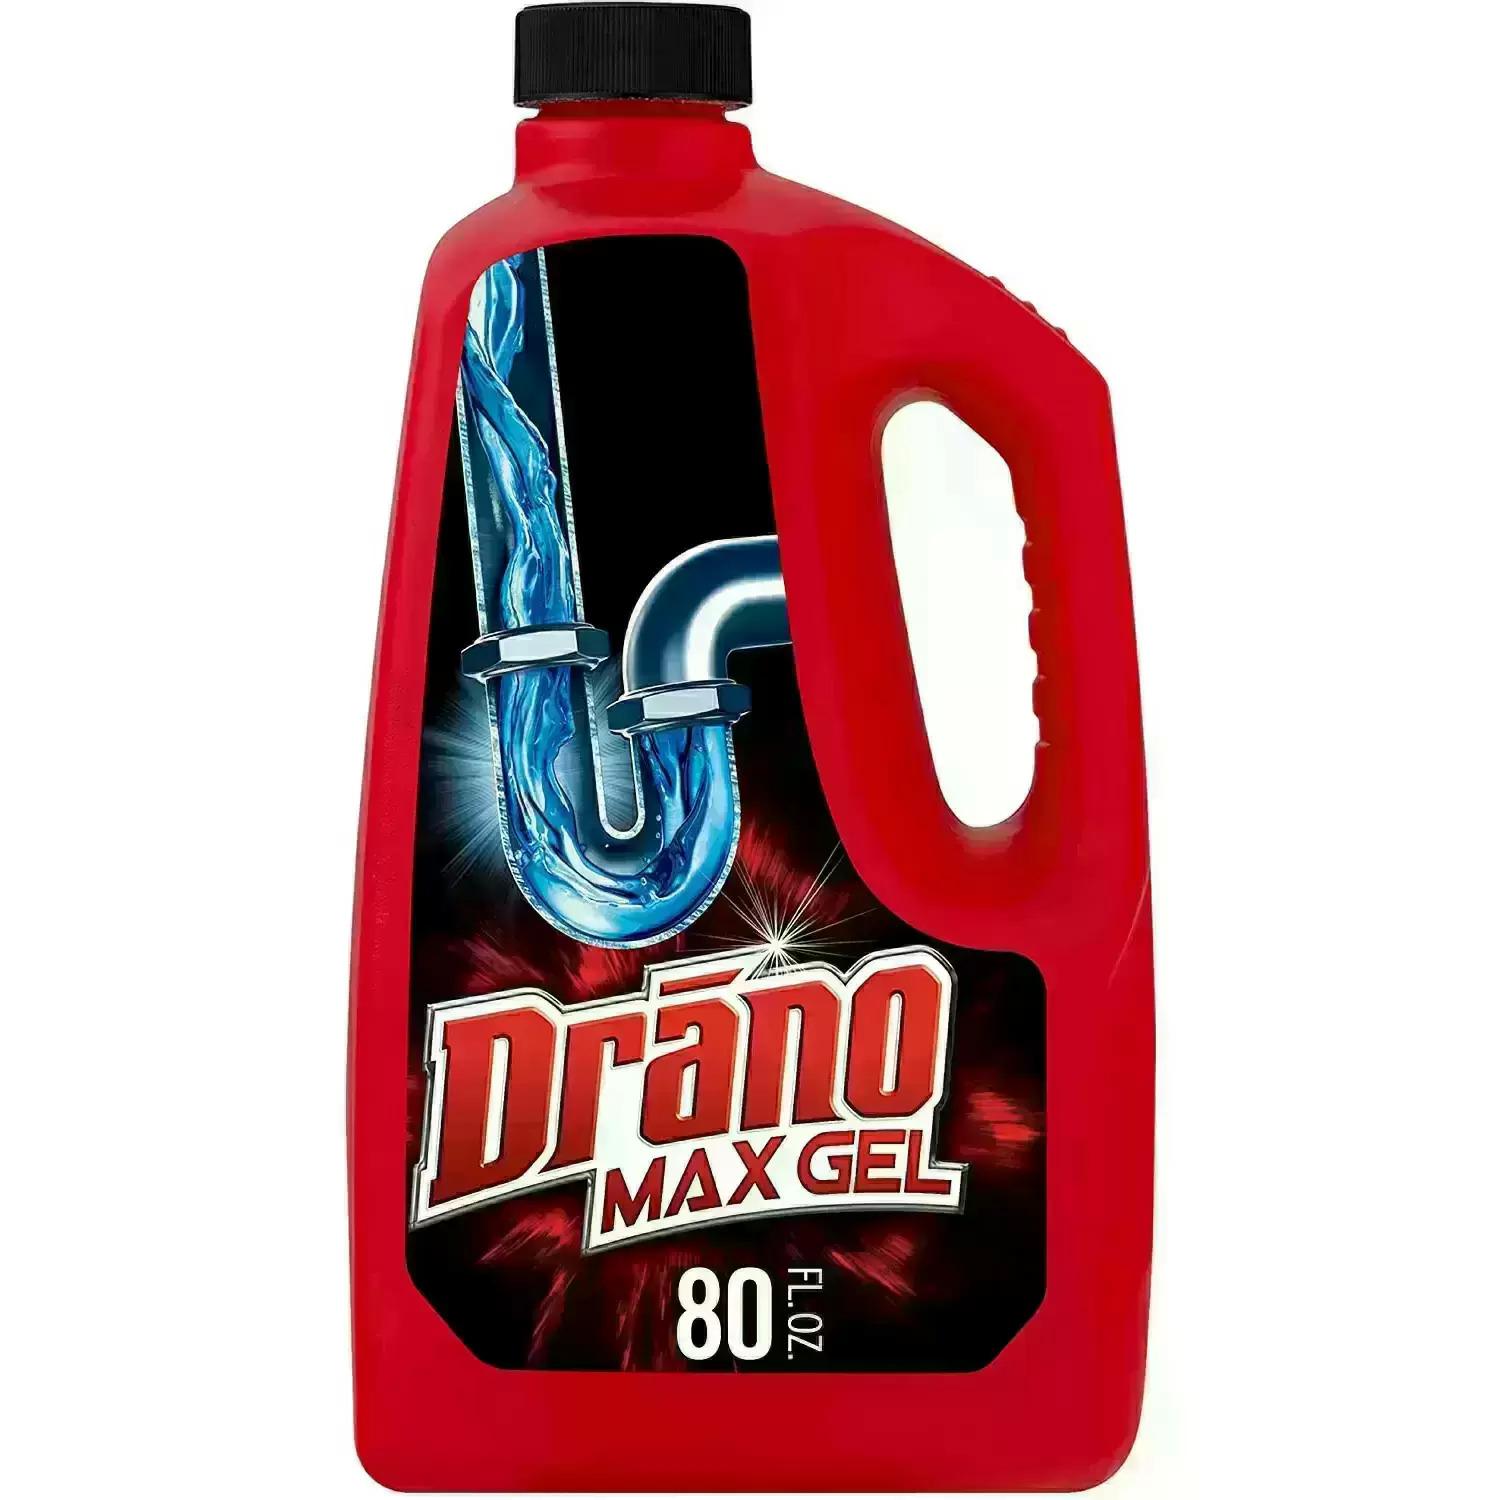 Drano Max Gel 80oz Drain Clog Remover and Cleaner for $6 Shipped